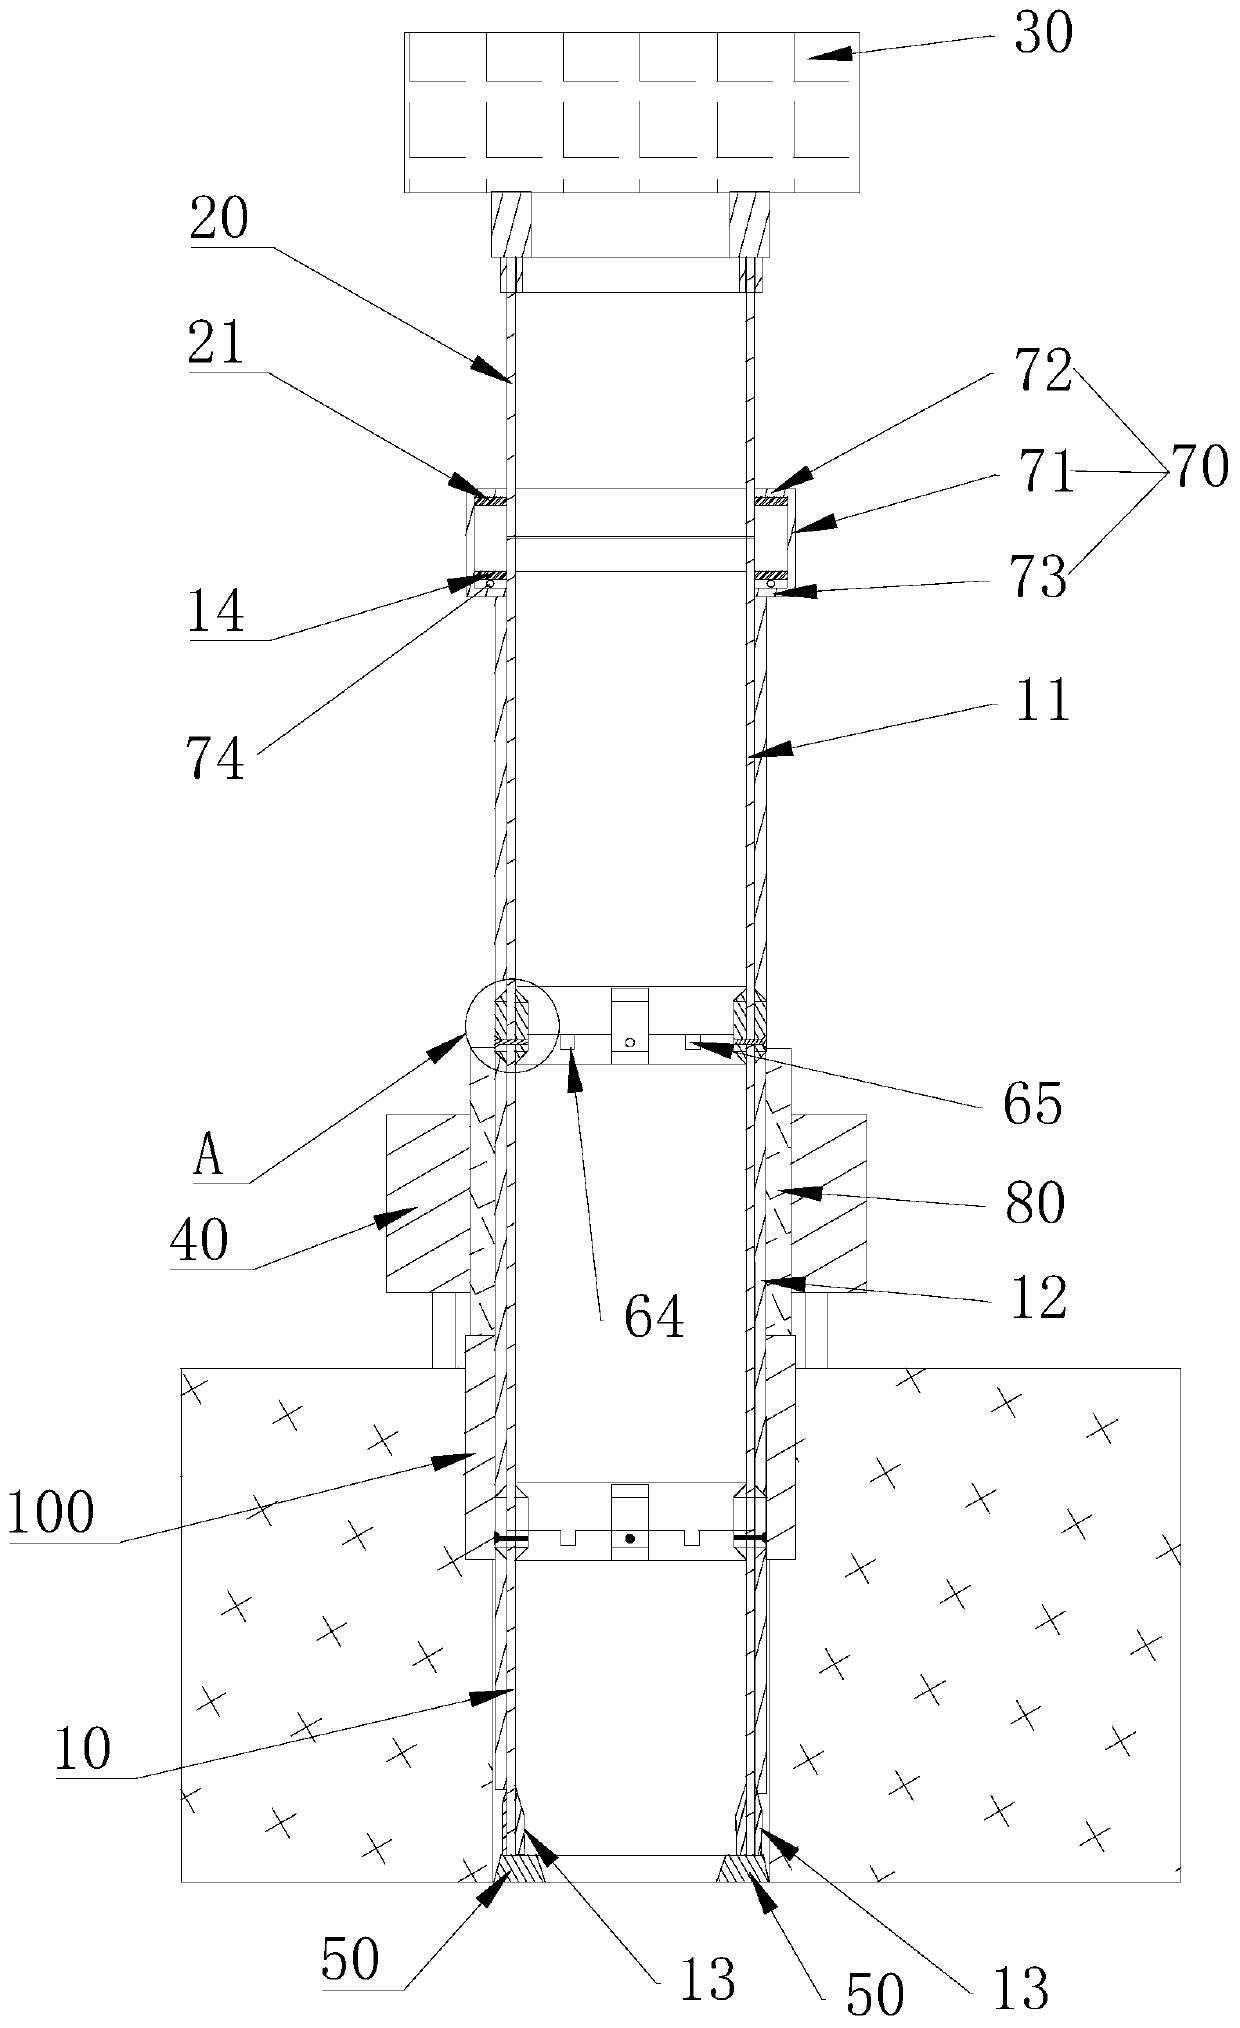 Full-rotating drill and hydraulic vibration hammer synergetic shaft sinking method